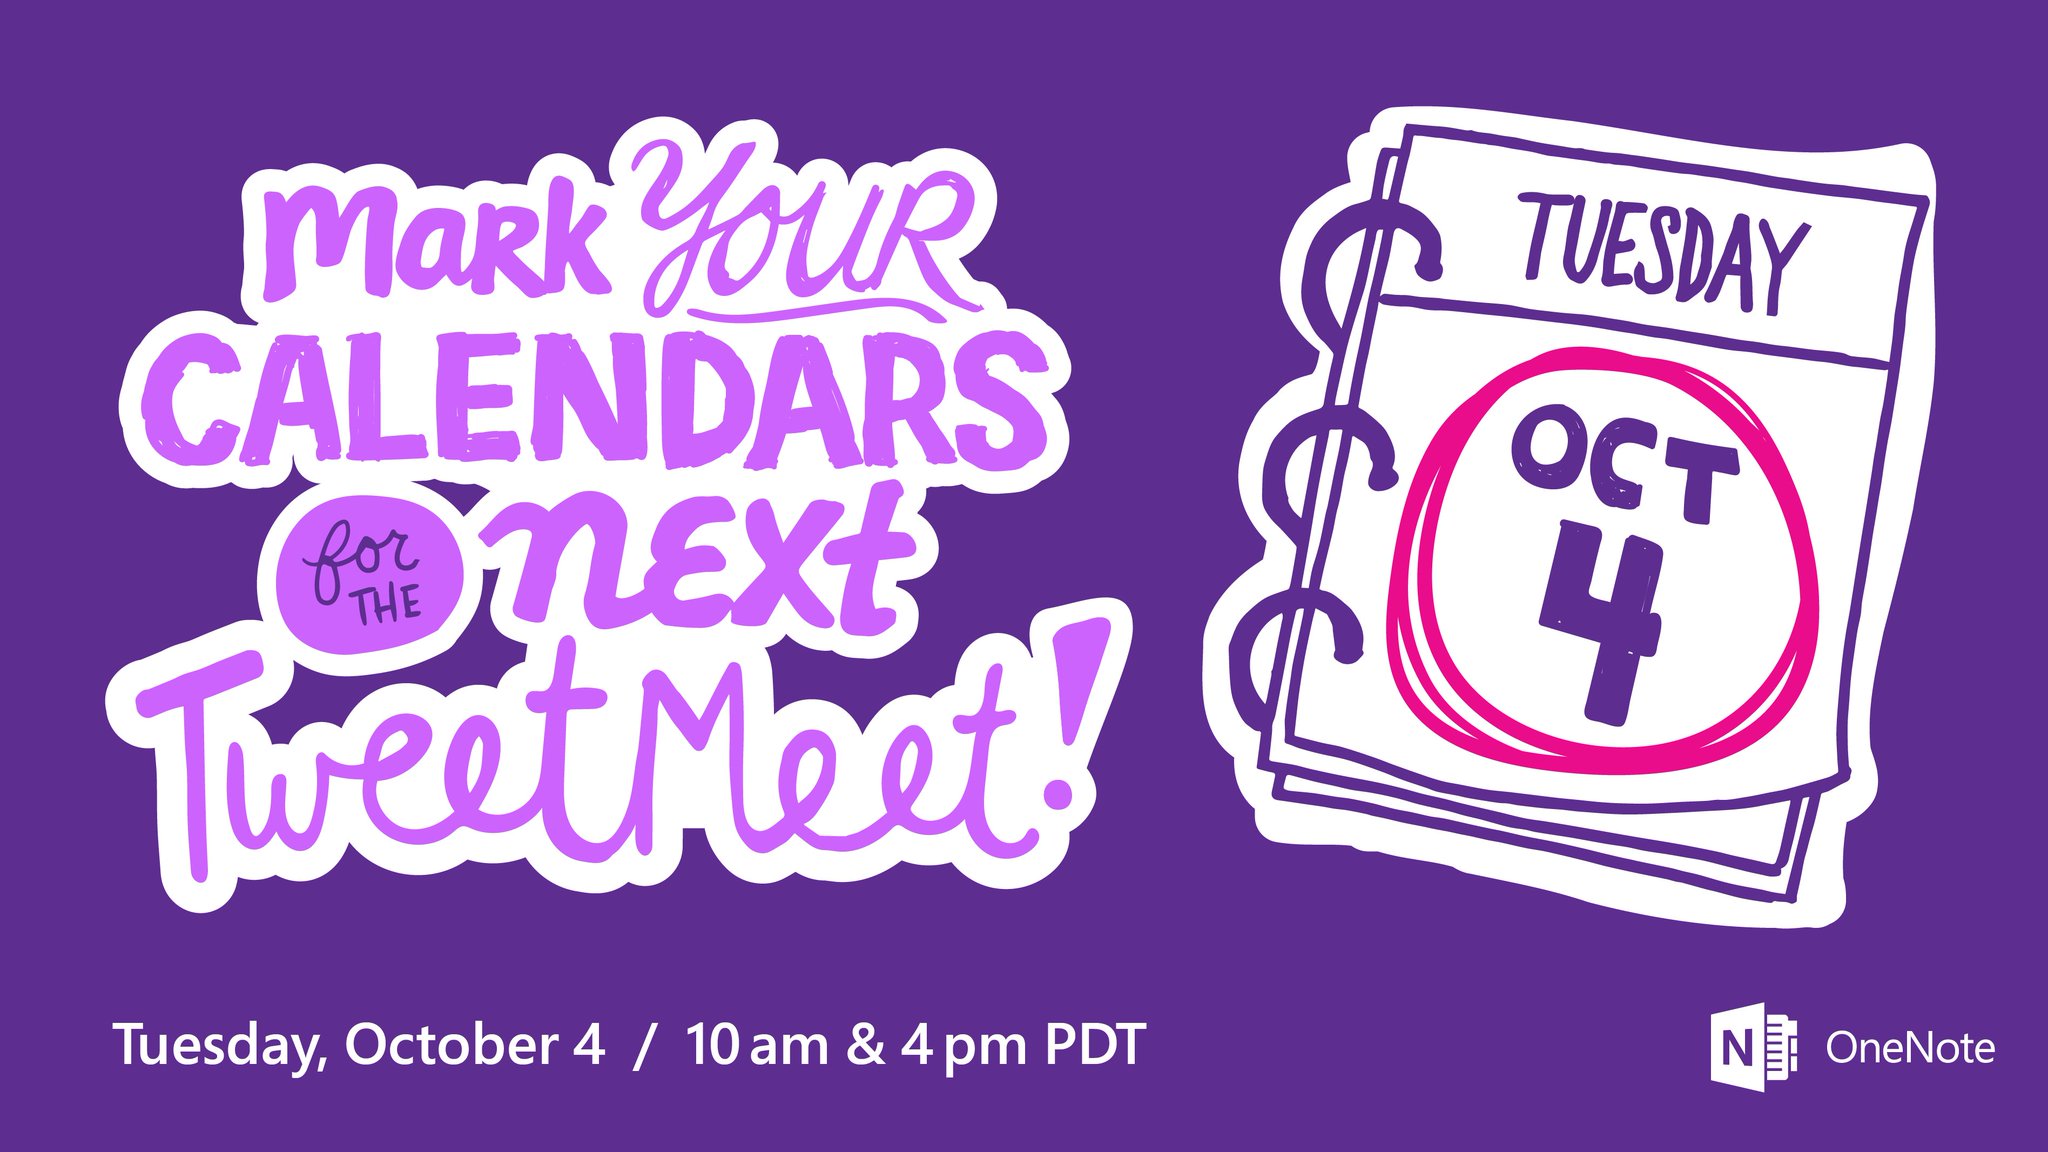 Thanks for joining today's #OneNote TweetMeet! Save the date for our next #OneNoteQ on October 4th. 10/4 PT #MSFTEdu https://t.co/x2ogDIVhvJ